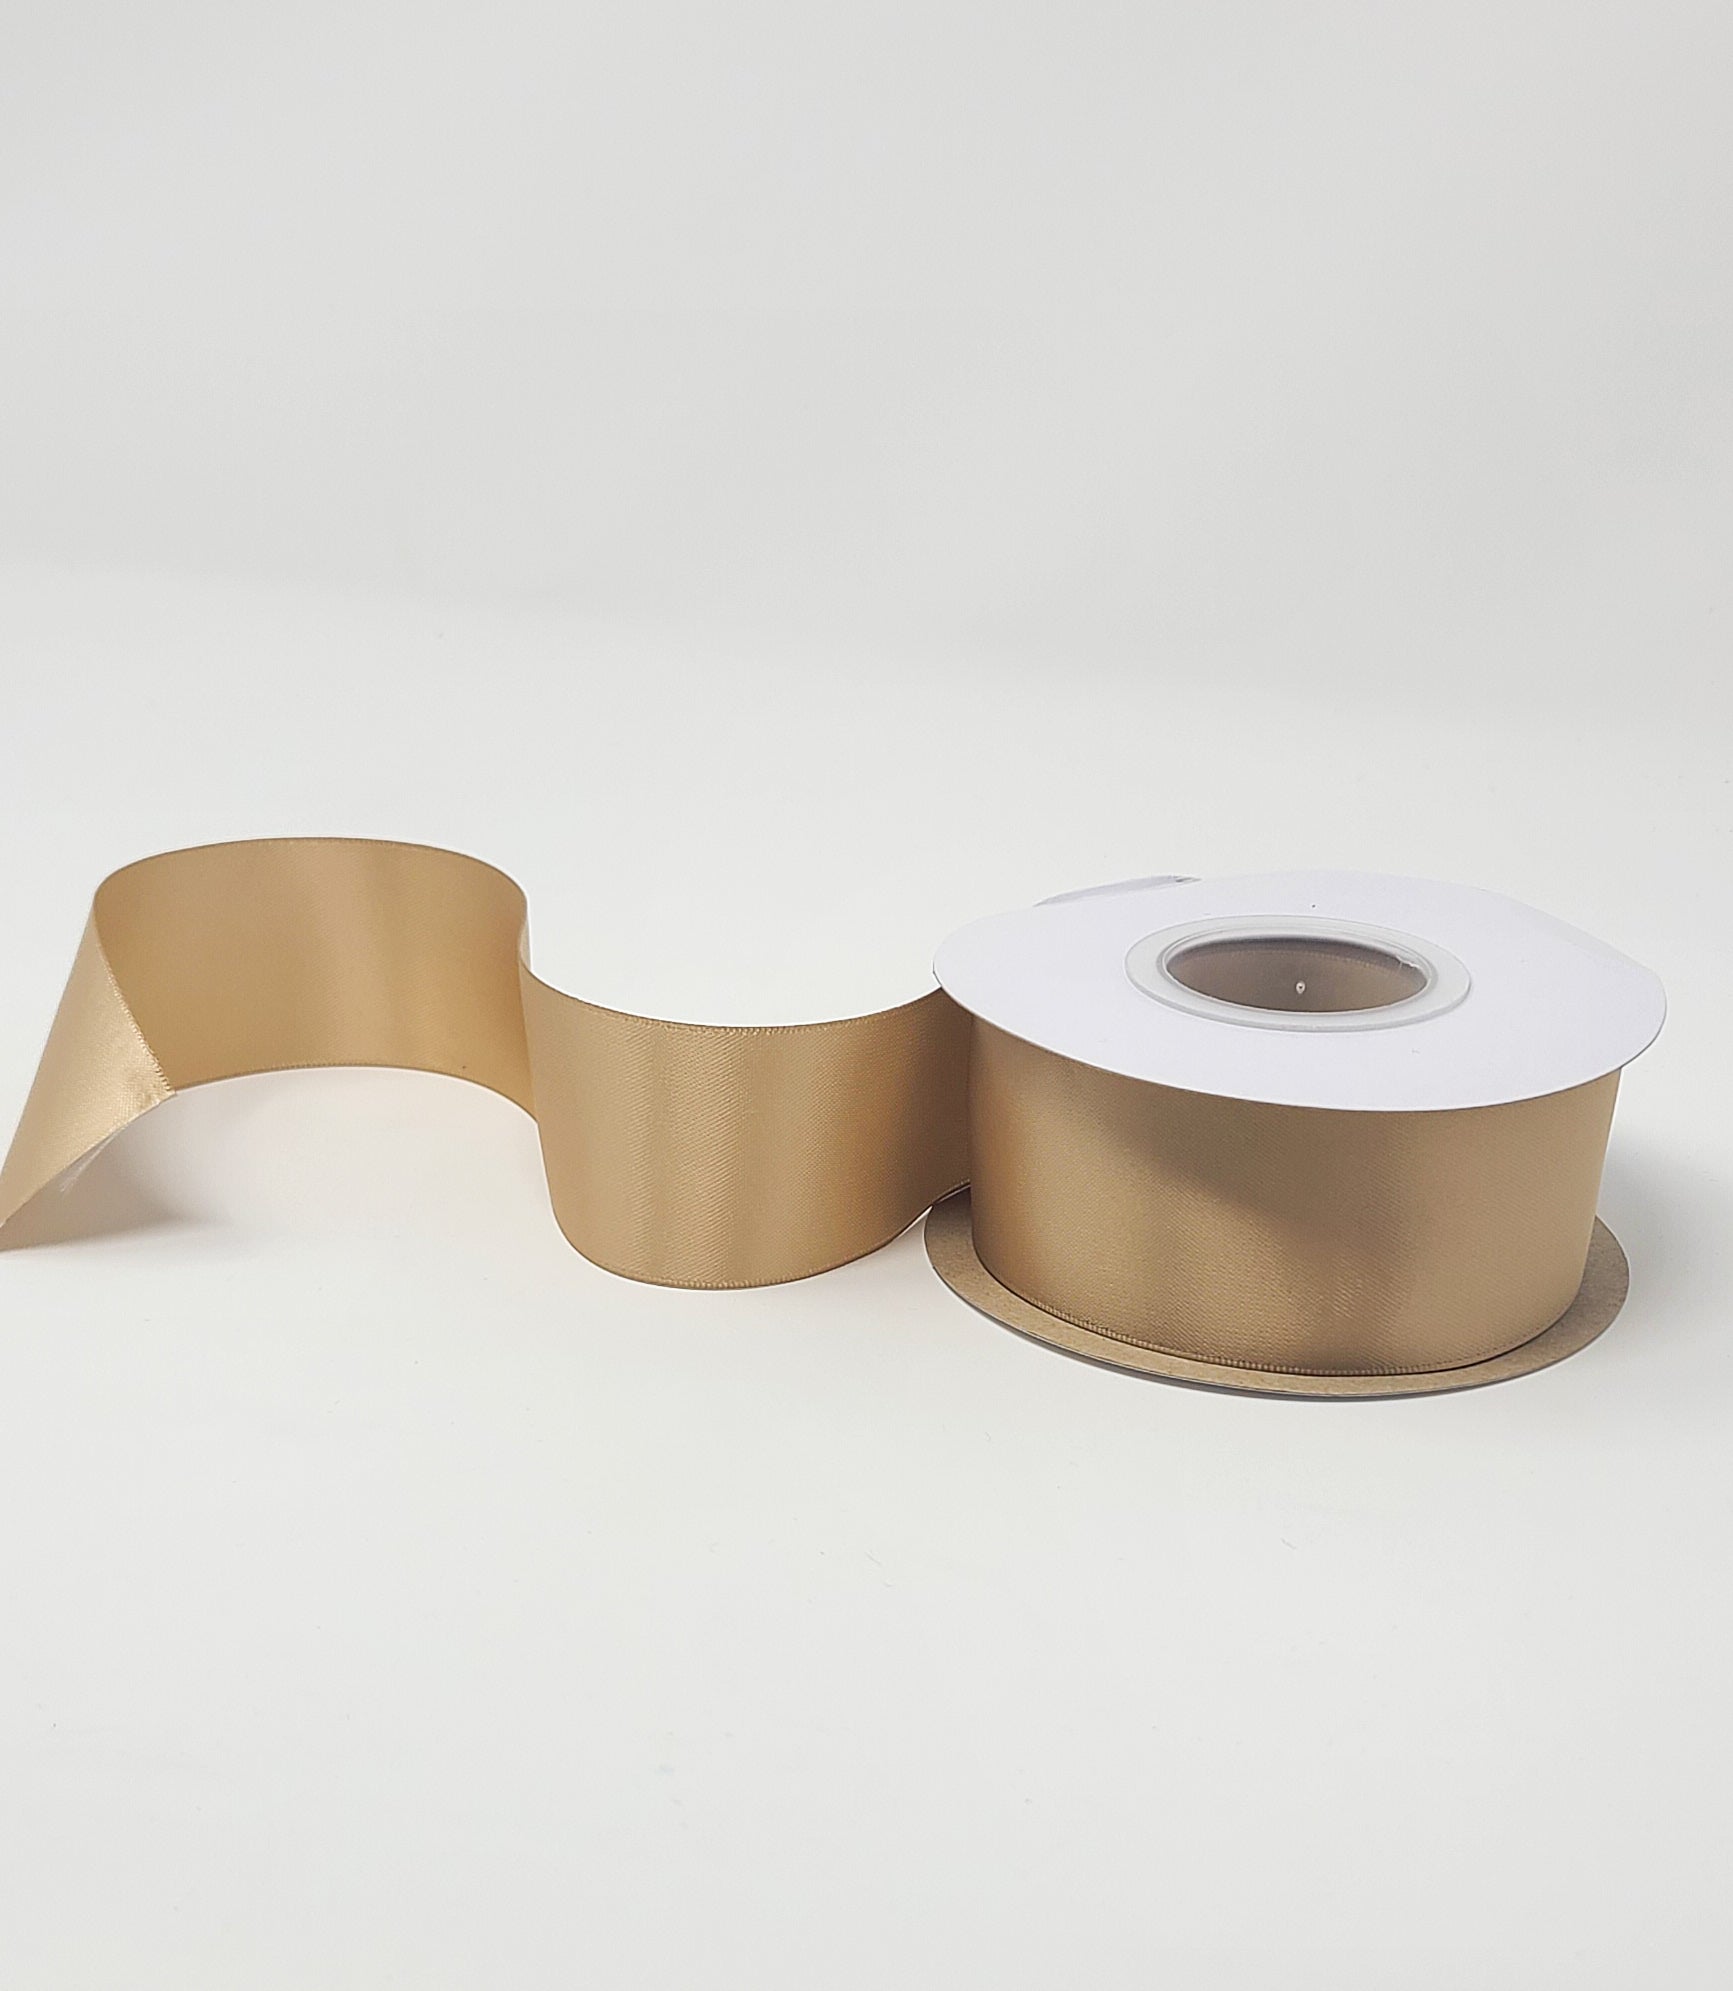 Latte - Double Face 1.5 inch Solid Colored Ribbon